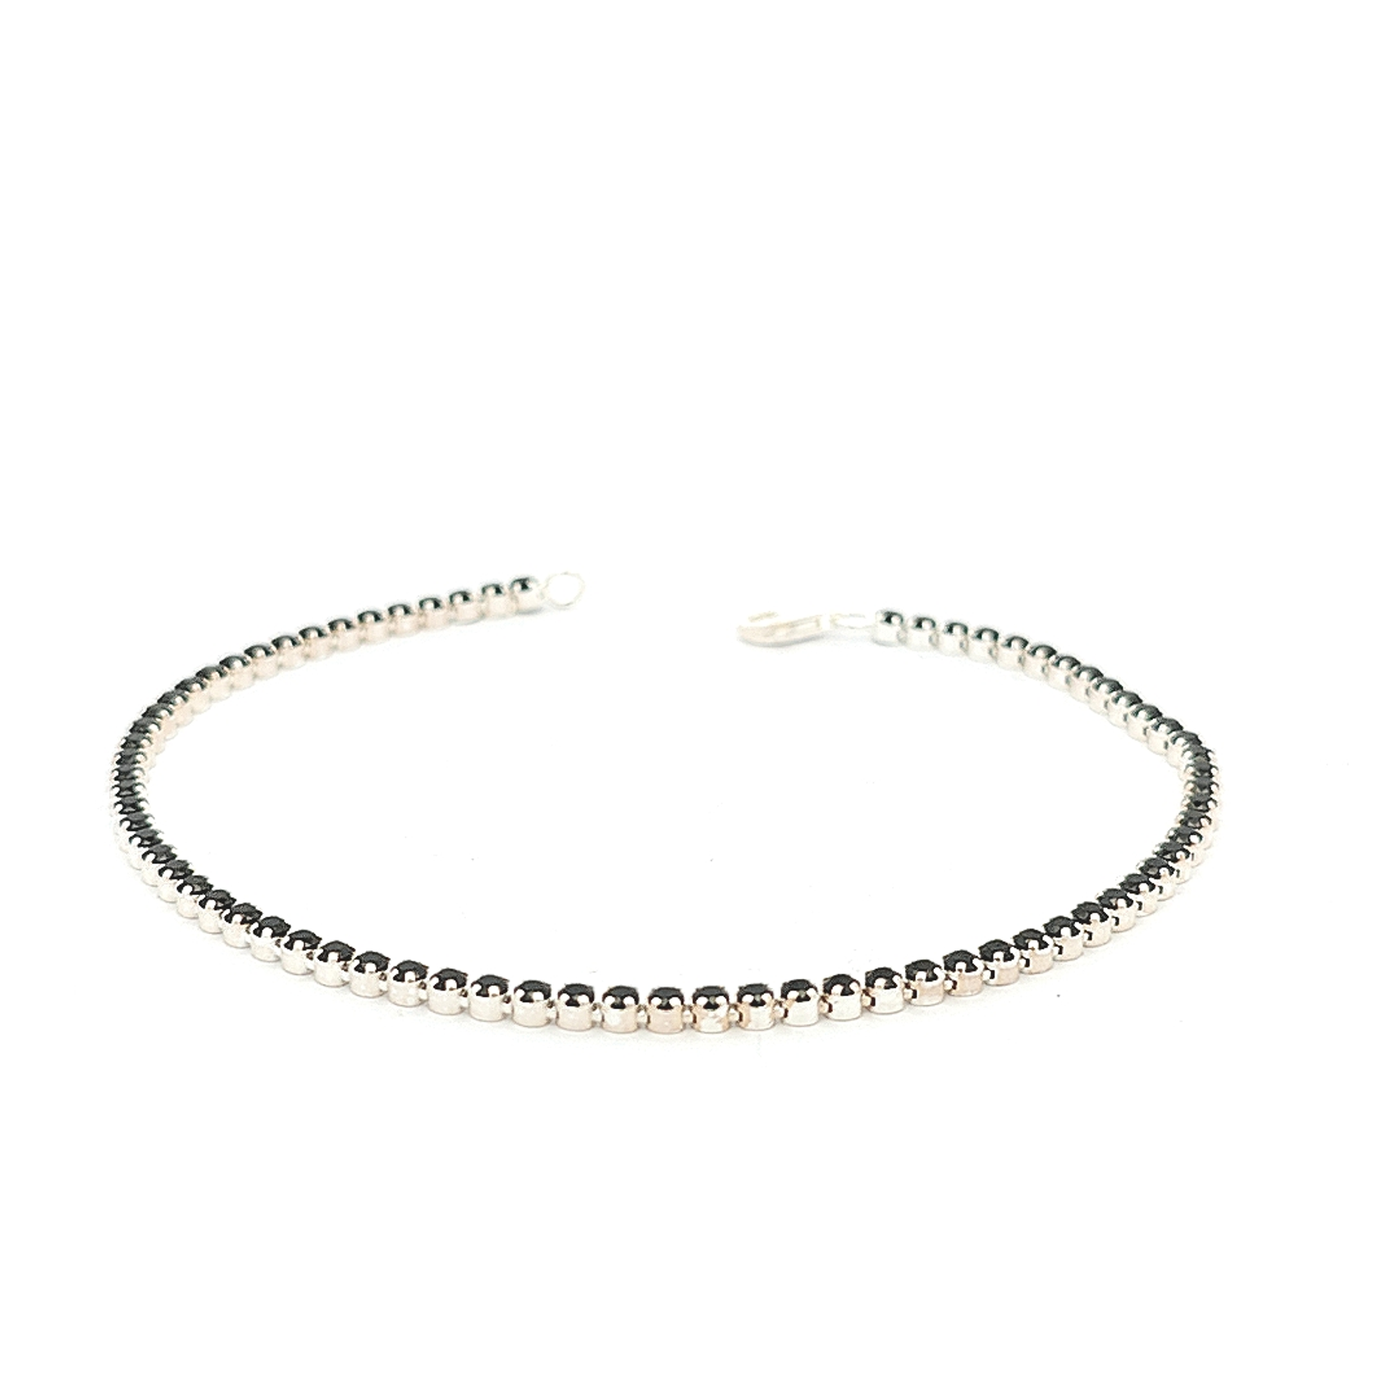 Black Cubic Zirconia and Sterling Silver Tennis Bracelet - boothandbooth